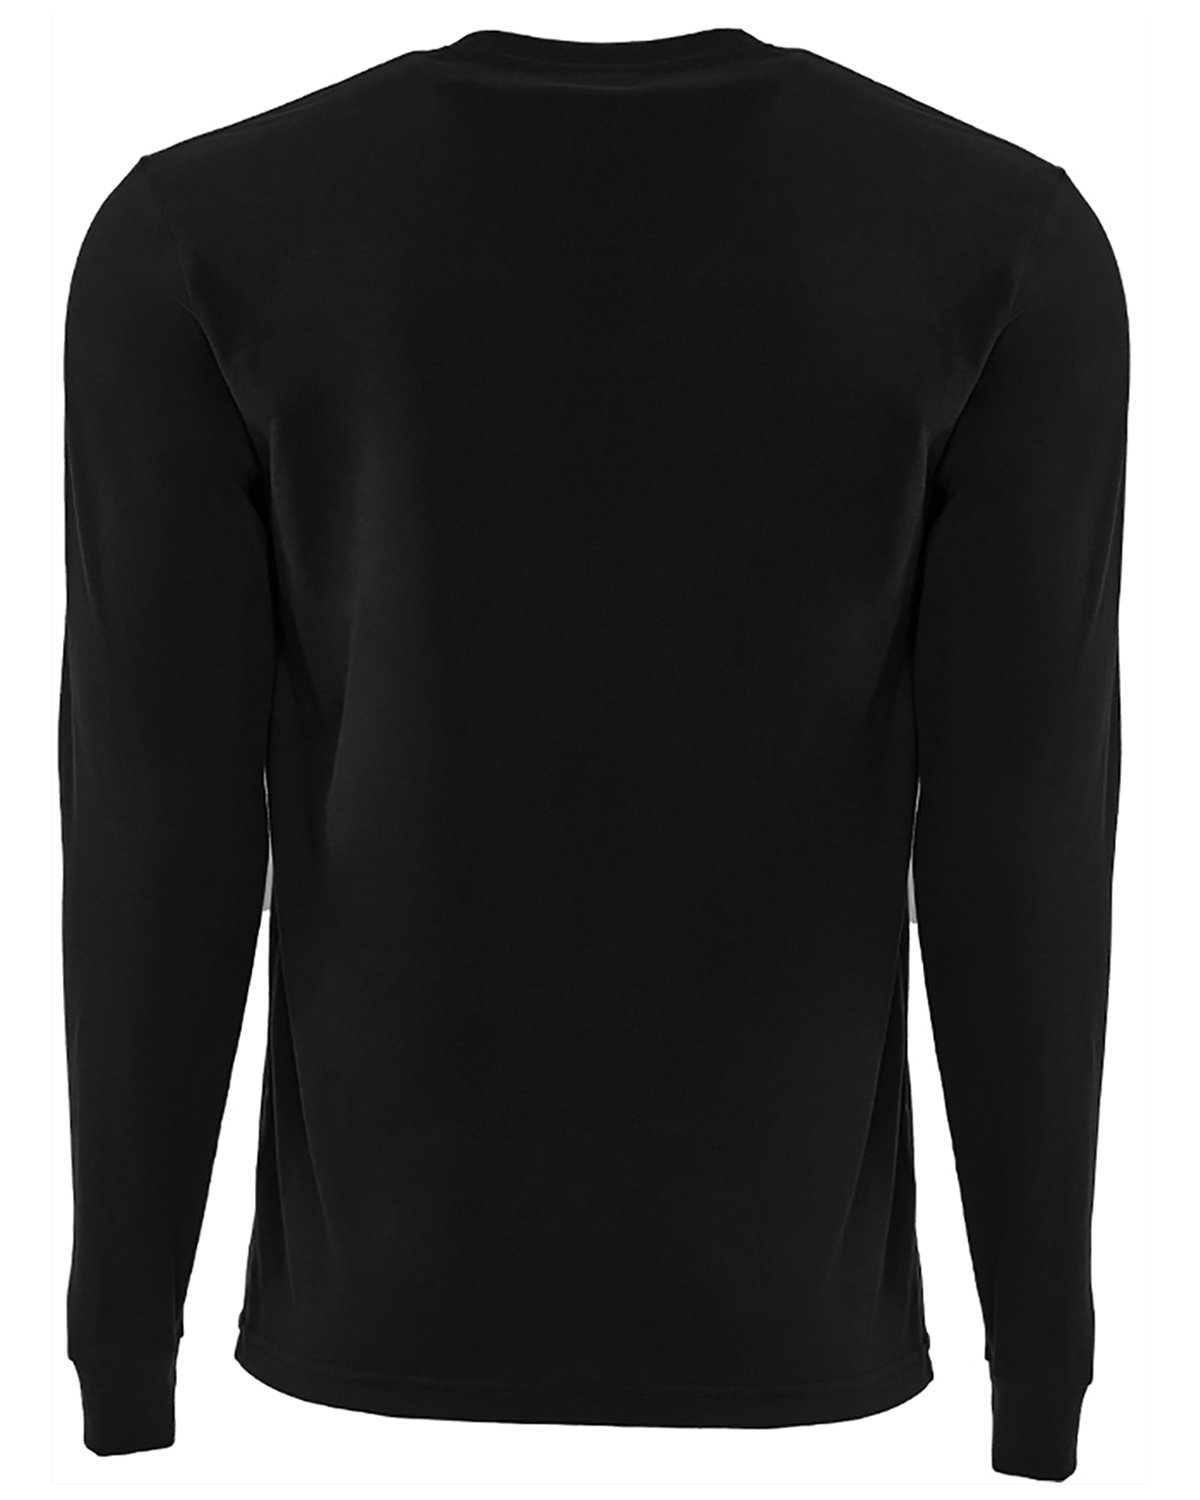 Next Level Unisex Sueded Long-Sleeve Crew | alphabroder Canada